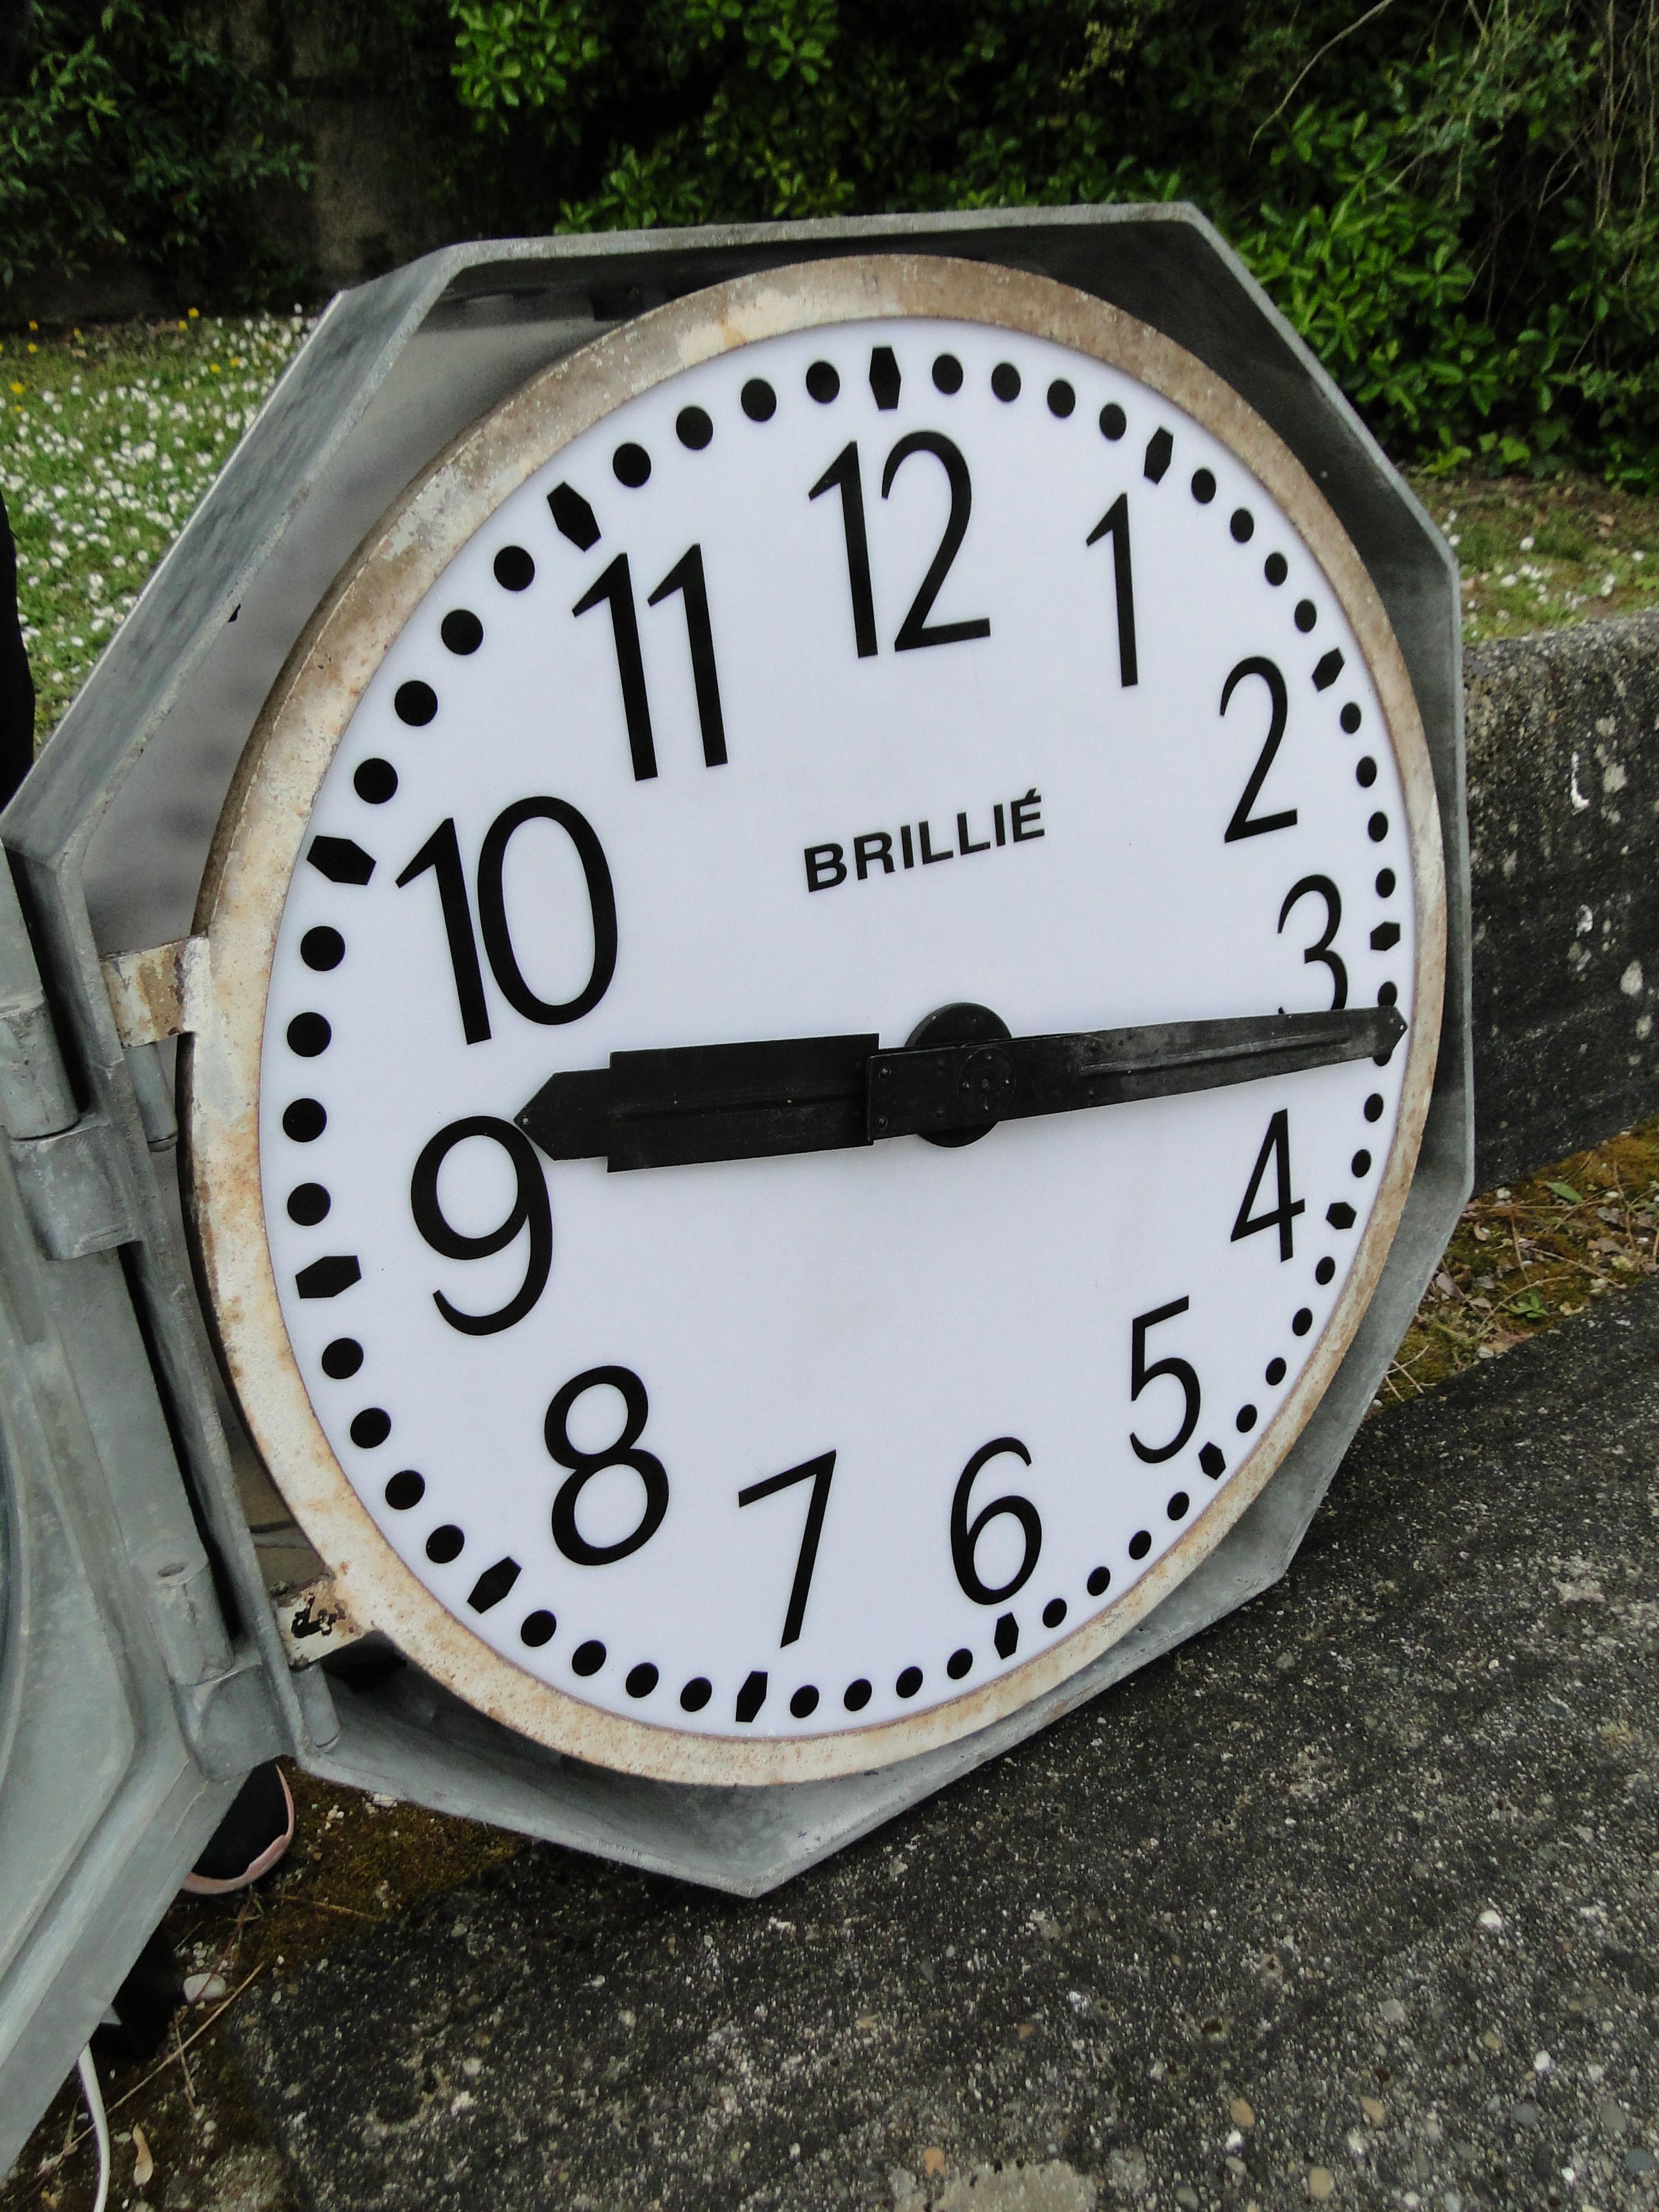 Brillie Vintage French  Station Railway Clock Factory Industrial  Paris France For Sale 2